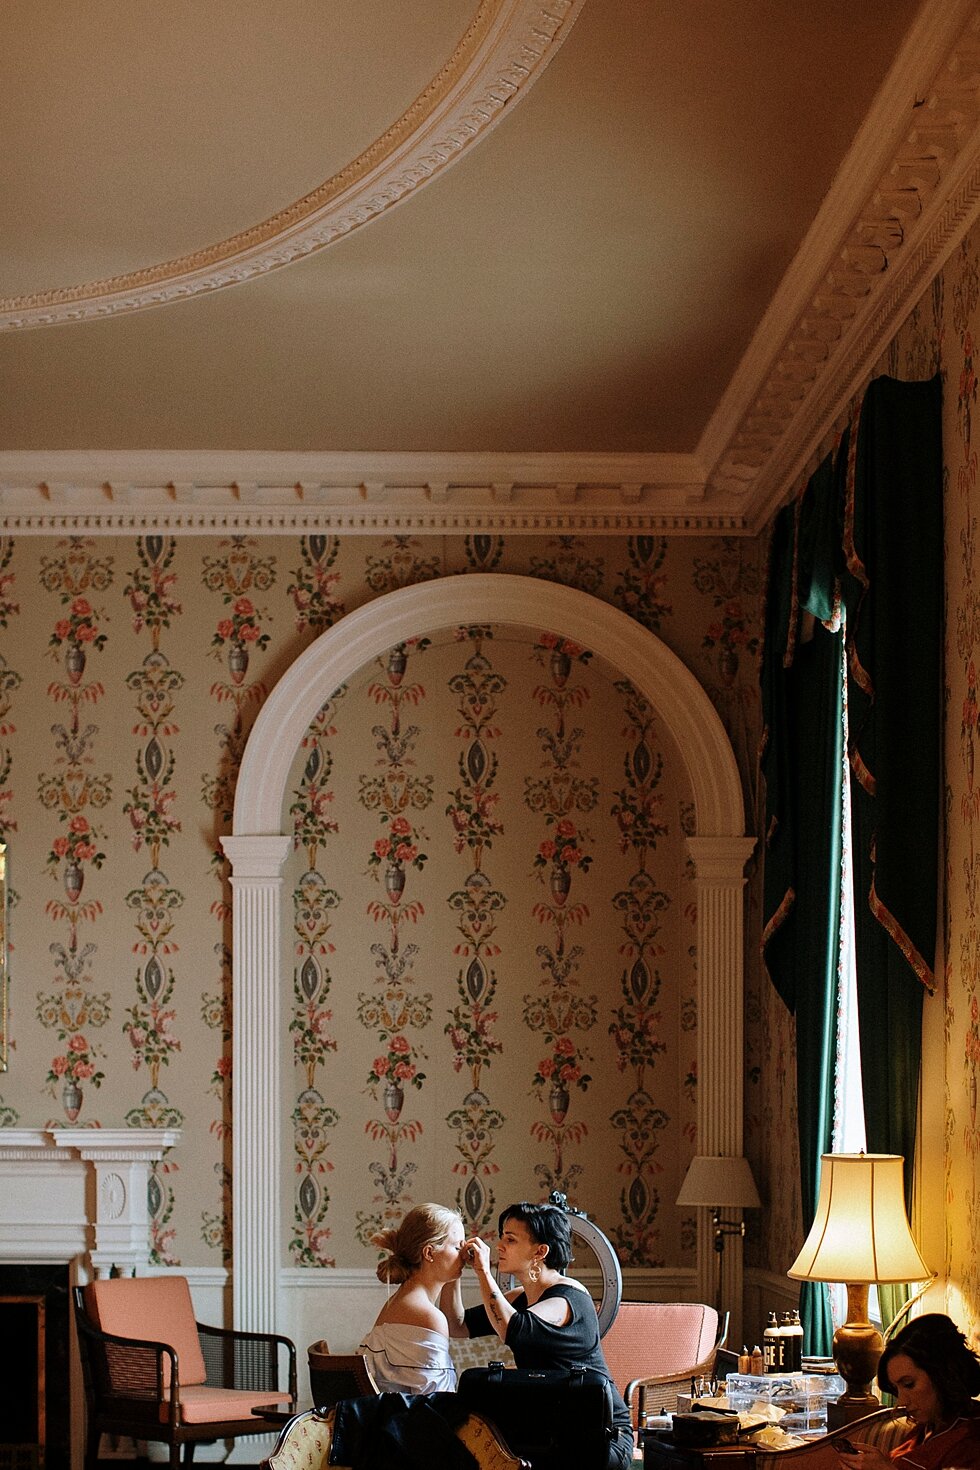  The bride getting ready in the Bride’s room. Brisk February winter wedding Pendennis Club Louisville, Kentucky southern wedding bride and groom carefree wedding breathtaking national register of historic places #winterwedding #louisvillekentucky #we